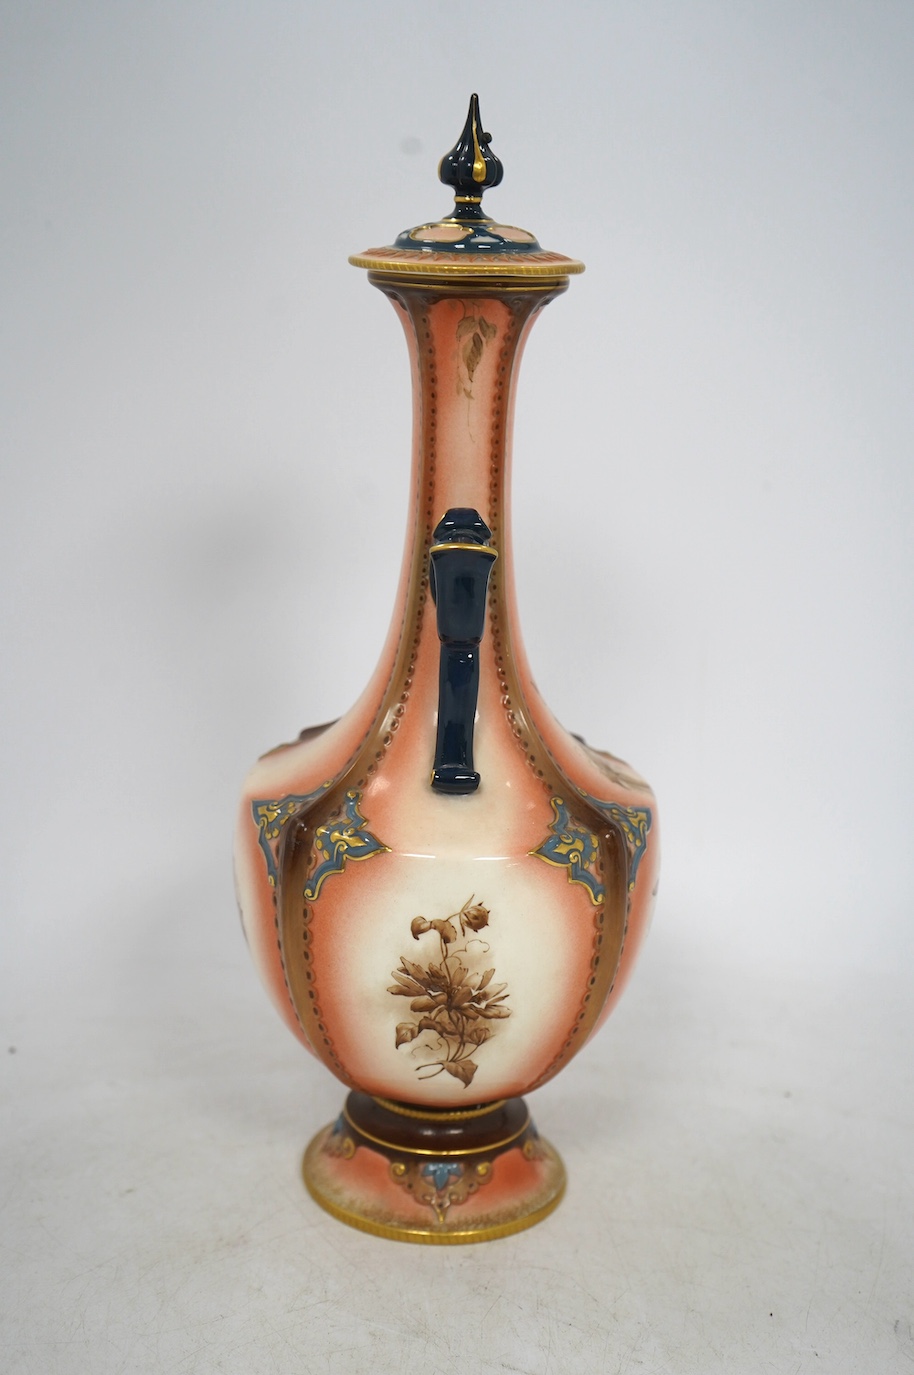 A Hadleys Worcester faience vase and cover, 31cm high. Condition - fair, the pommel on the lid has been broken and reattached